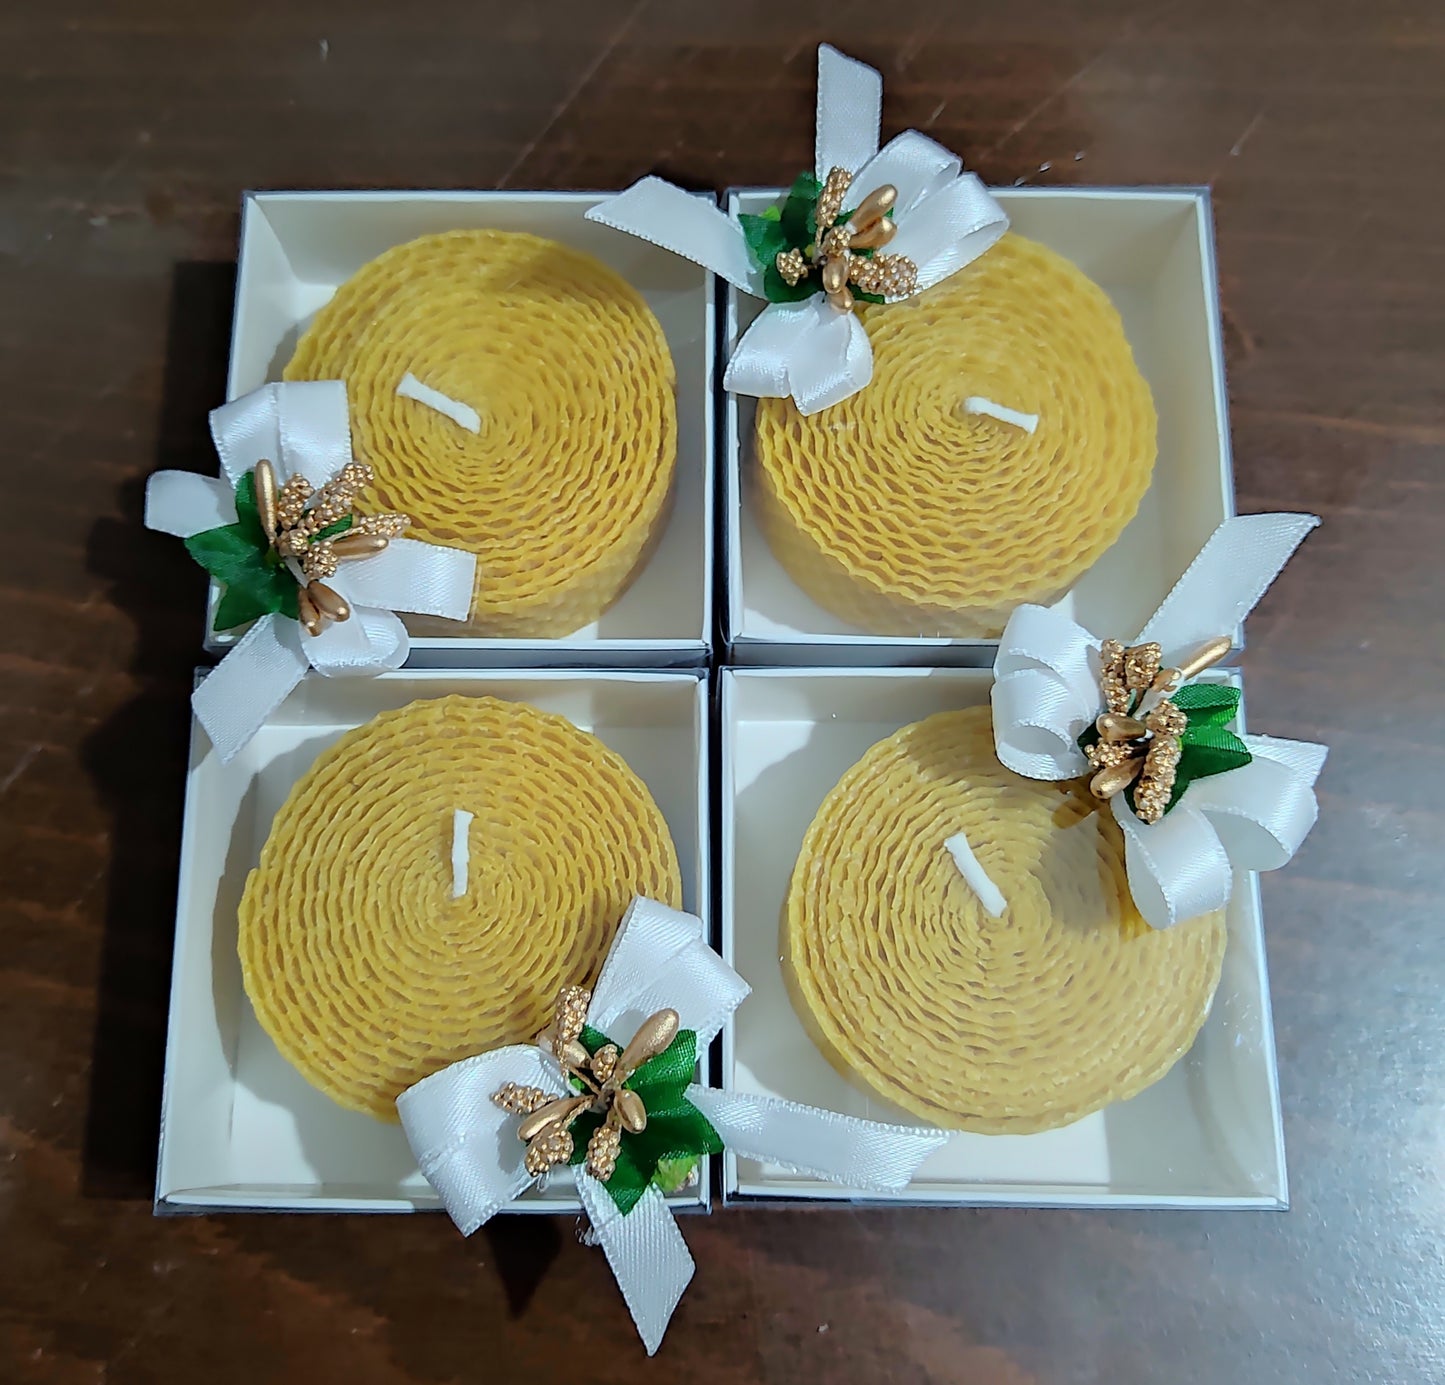 Honeycomb wedding favors, Hand-rolled bridesmaid favors, Beeswax candles wedding favors